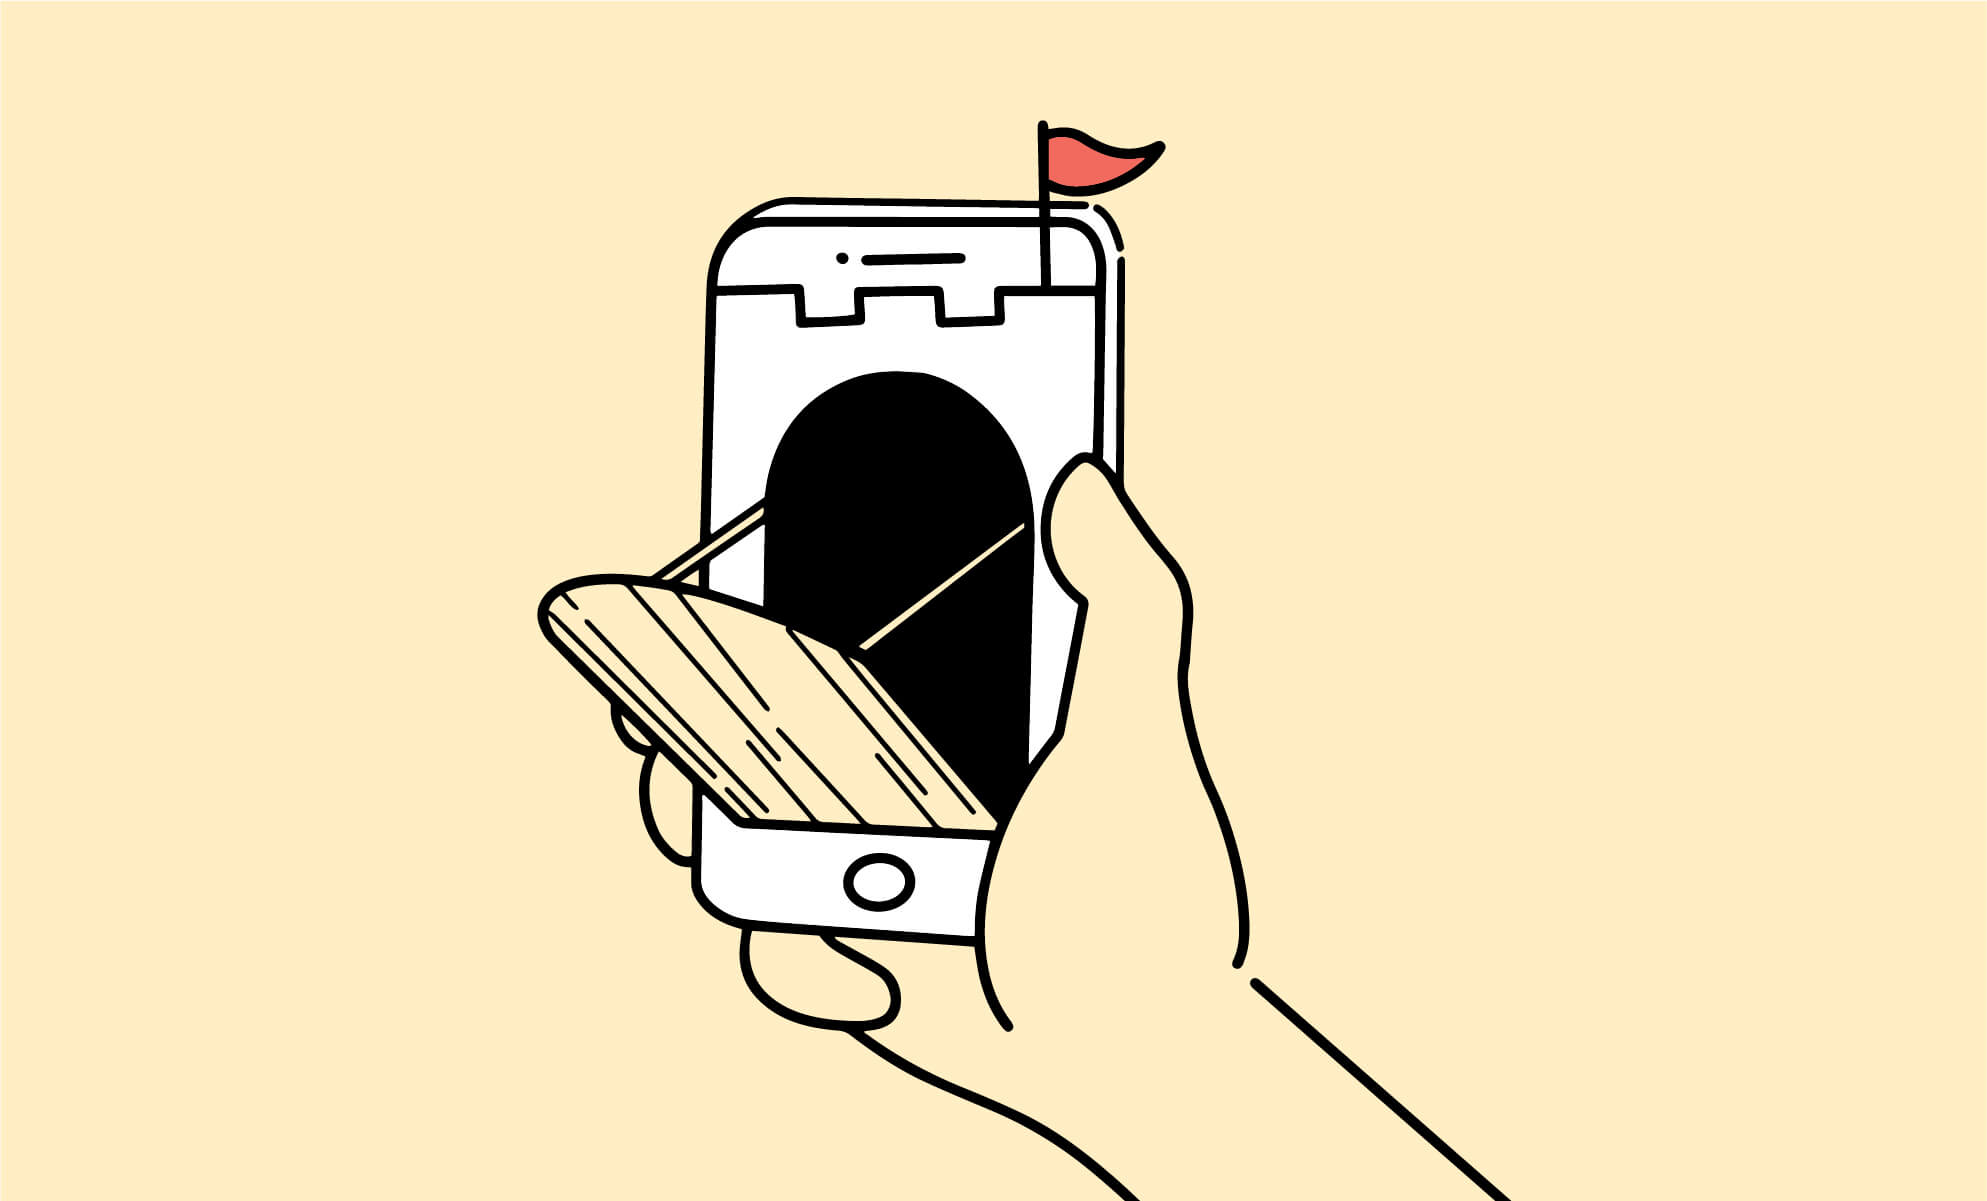 Illustration of a mobile phone with a drawbridge attached to its face, symbolizing cybersecurity awareness. (Whitney Matterfiis for BrainStorm, Inc.) - 10-25-2021